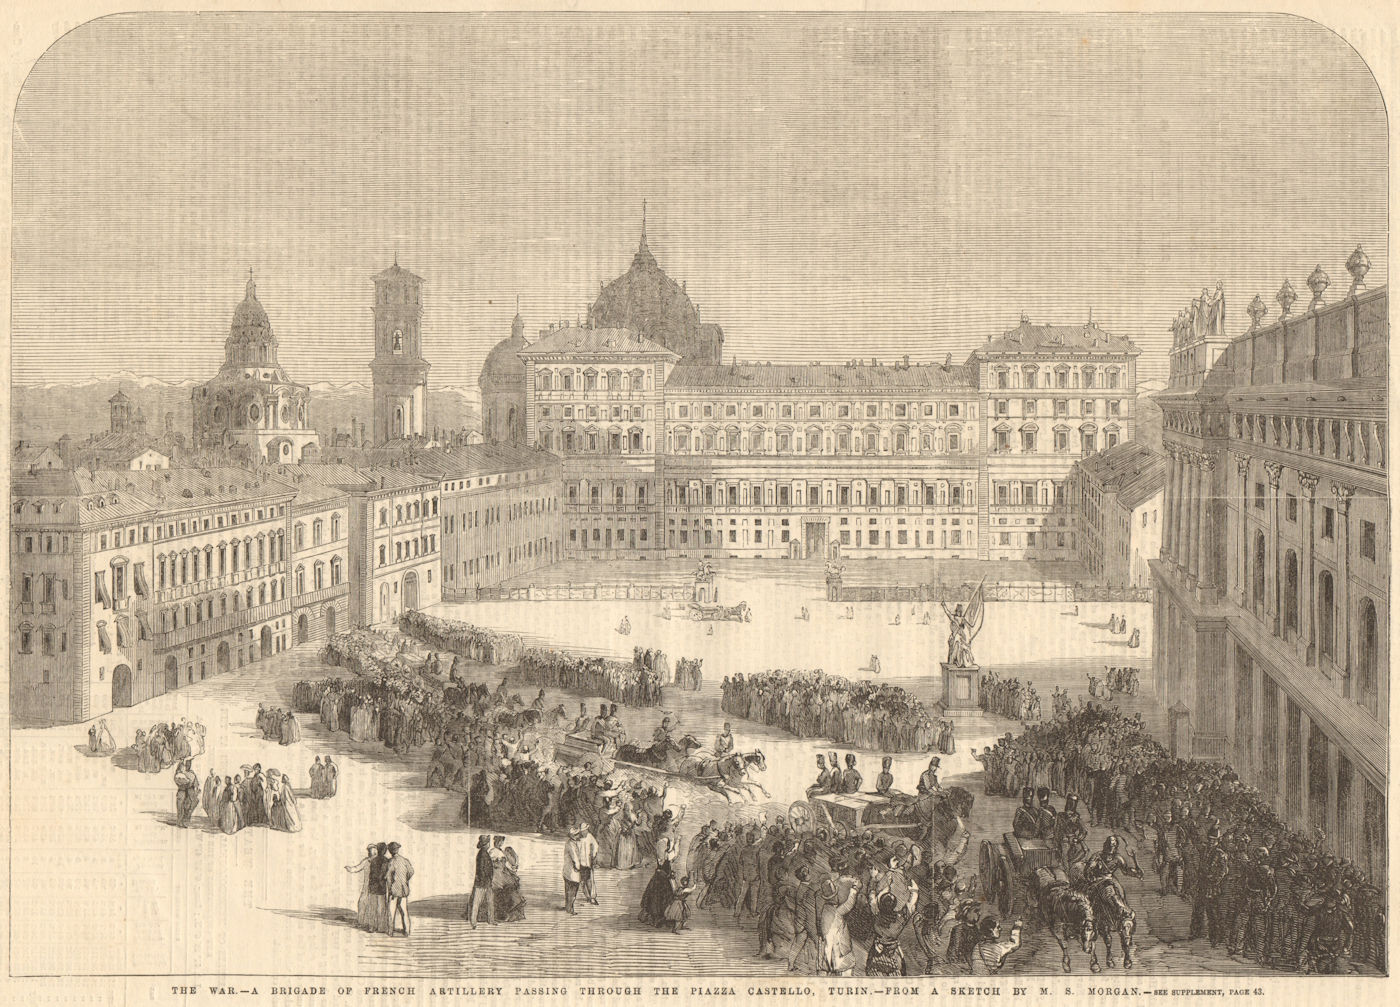 Associate Product Italian independence wars. French artillery in the Piazza Castello, Turin 1859